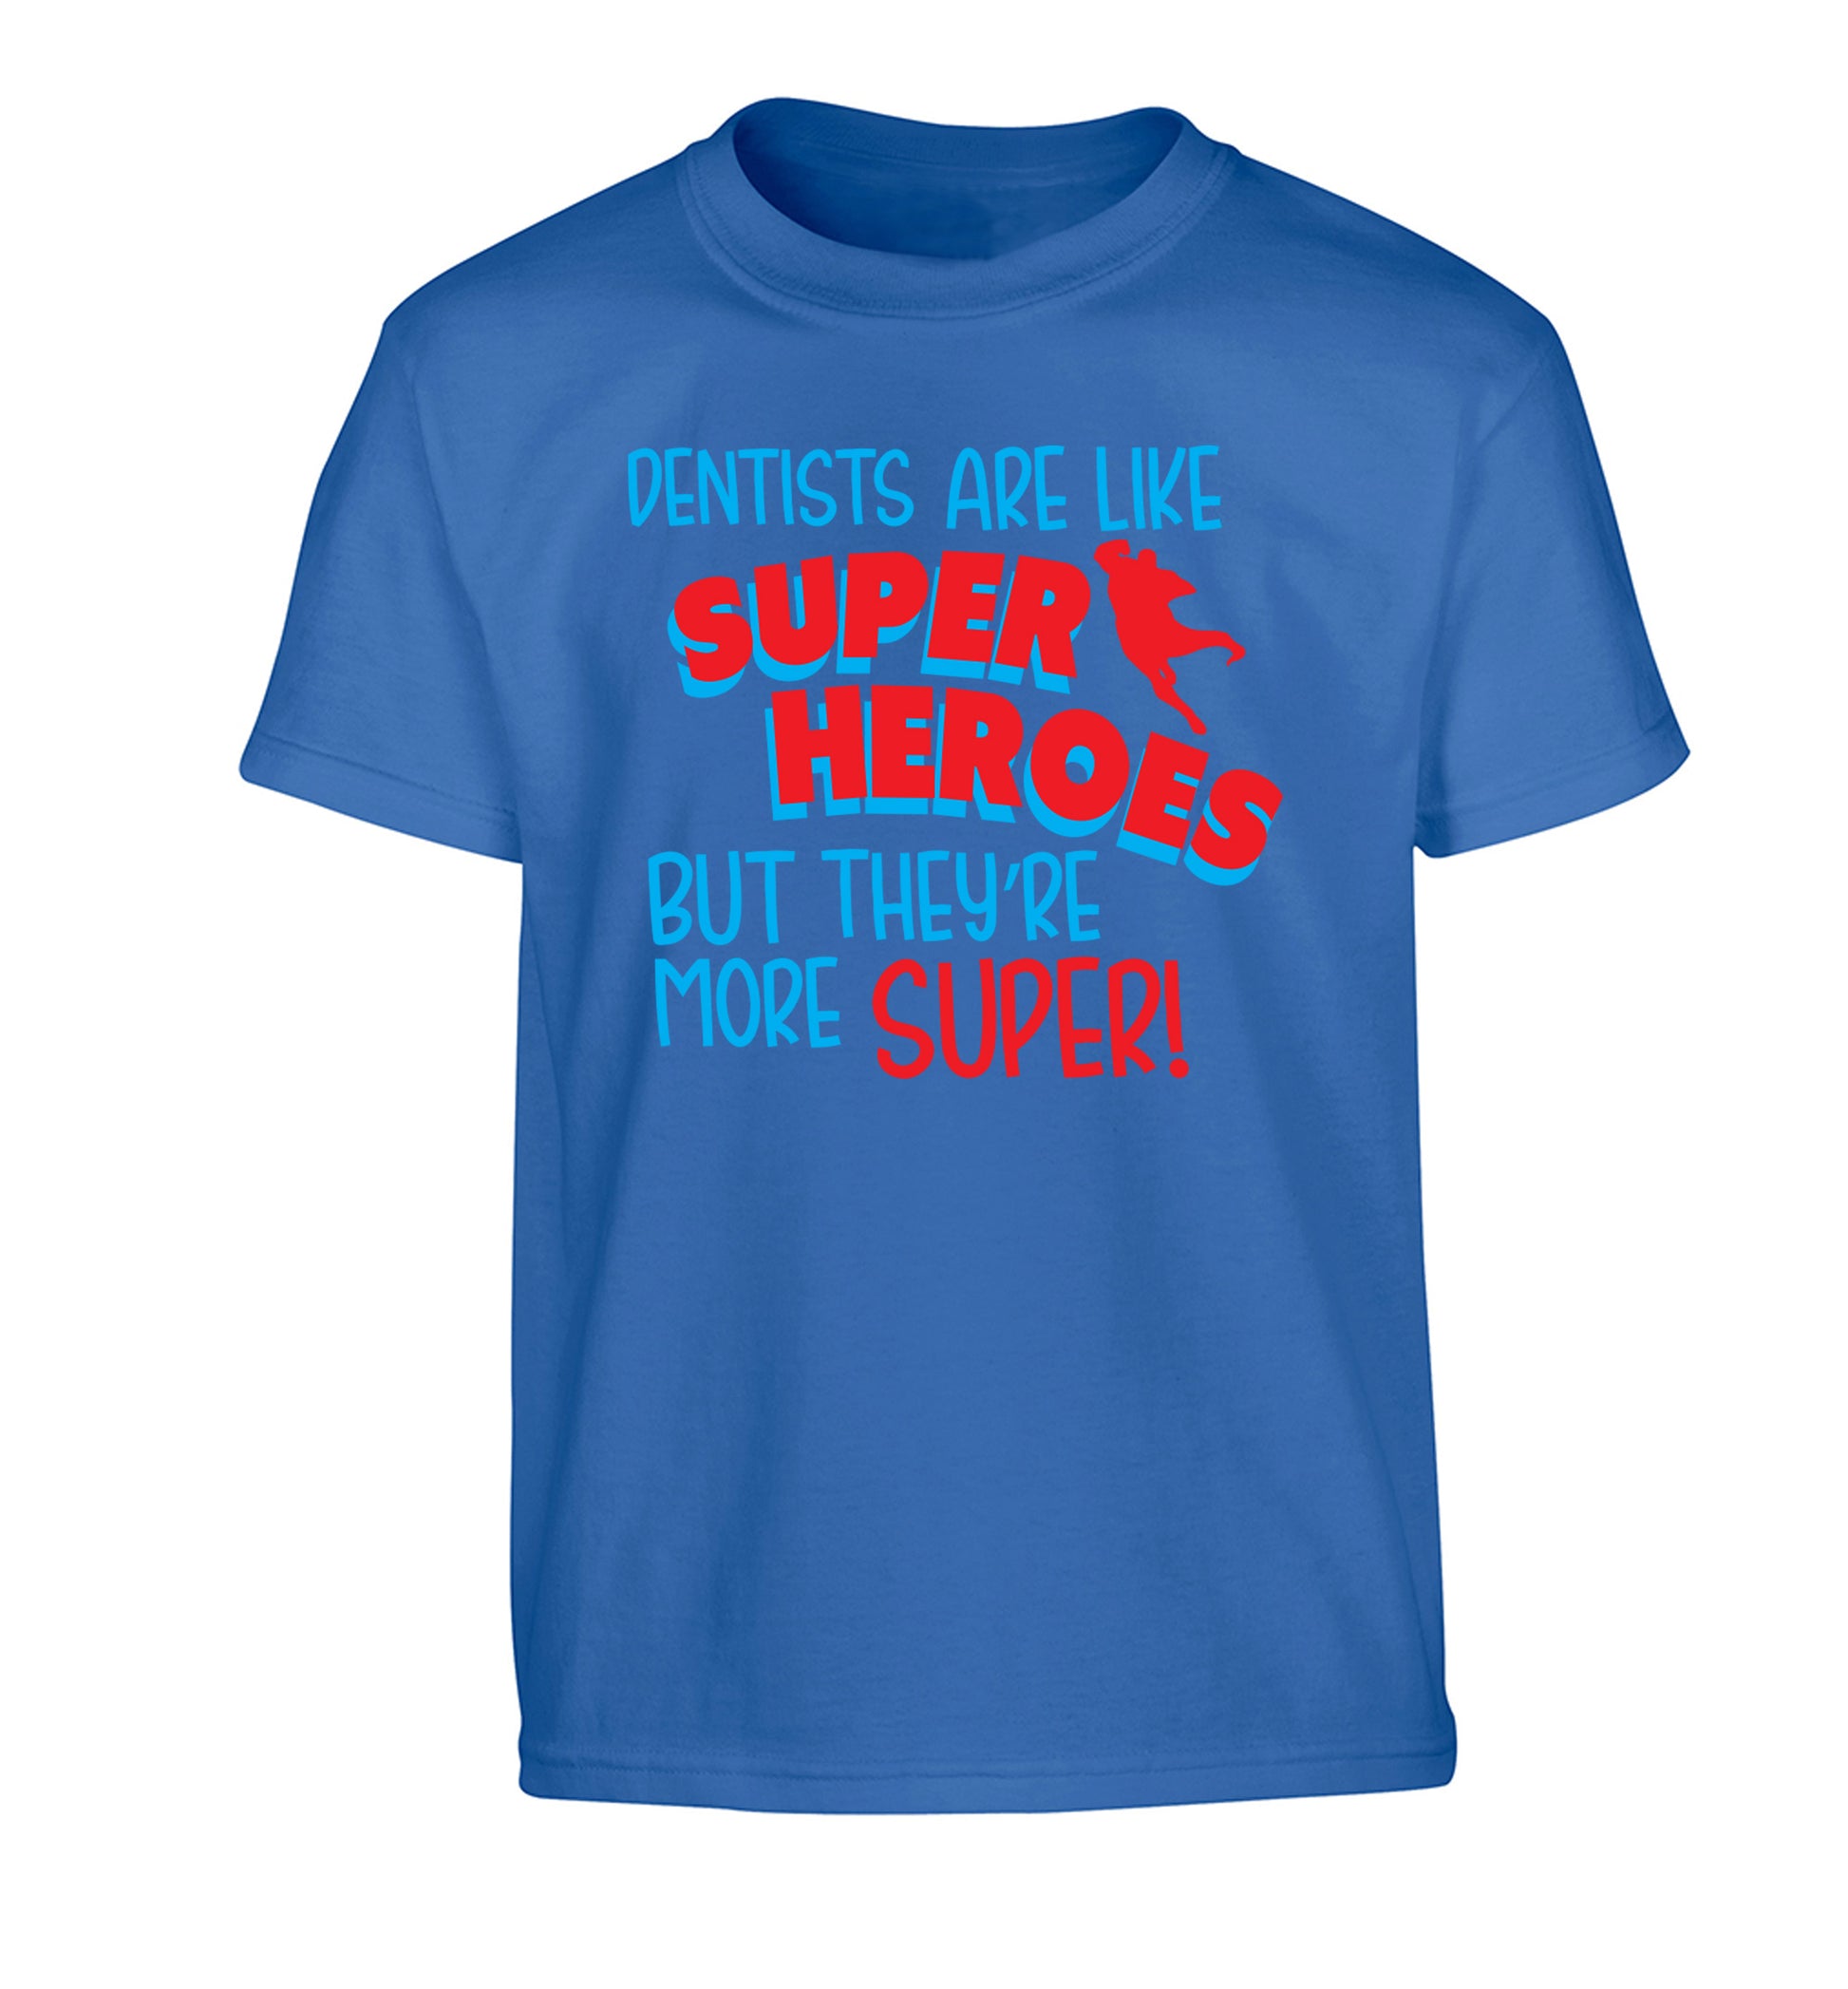 Dentists are like superheros but they're more super Children's blue Tshirt 12-13 Years